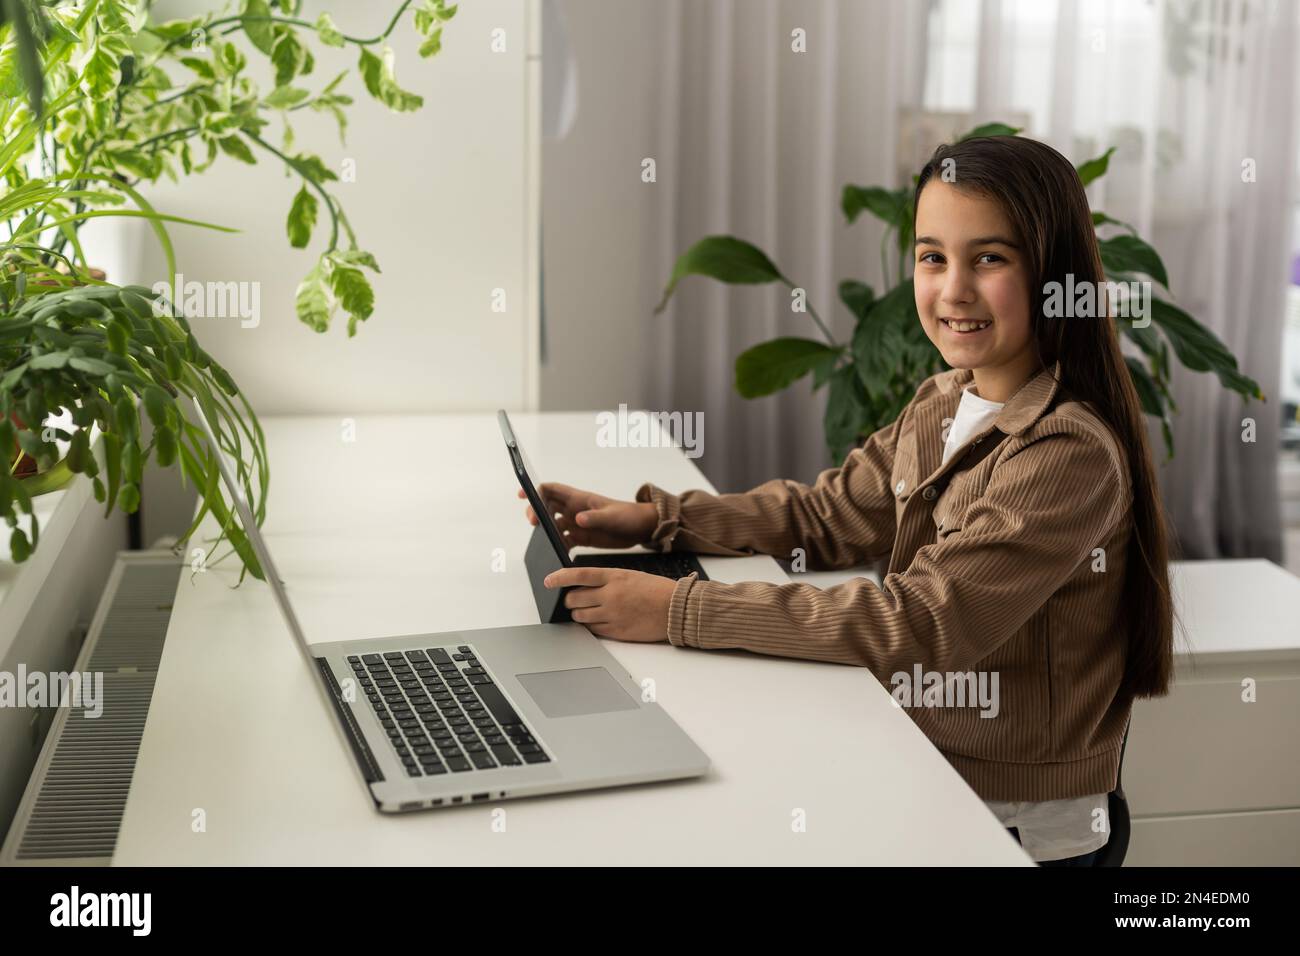 Smiling girl on videocall with guy, making video call to close foreign friend, talking by web camera, using virtual chat app online, long distance Stock Photo